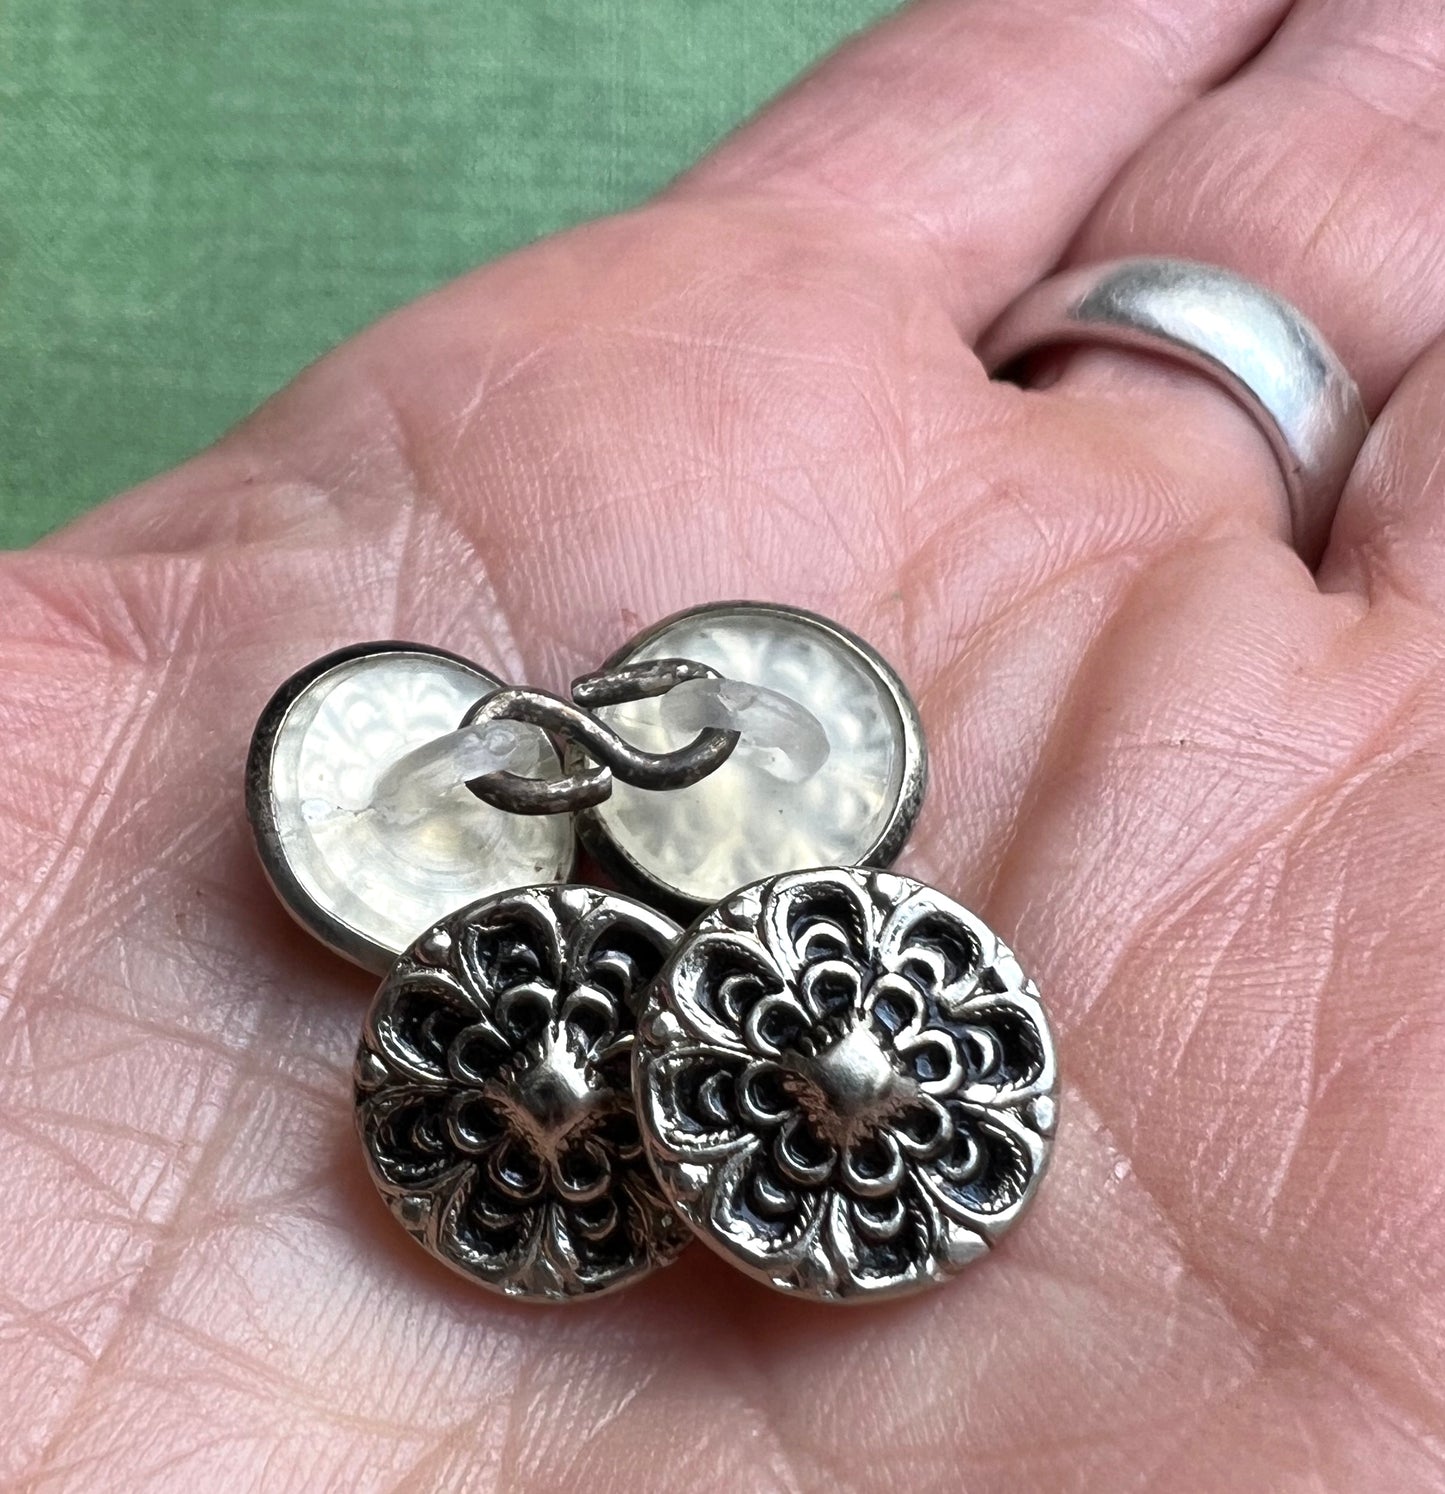 Pair of 12mm Decorative Metal Vintage Buttons